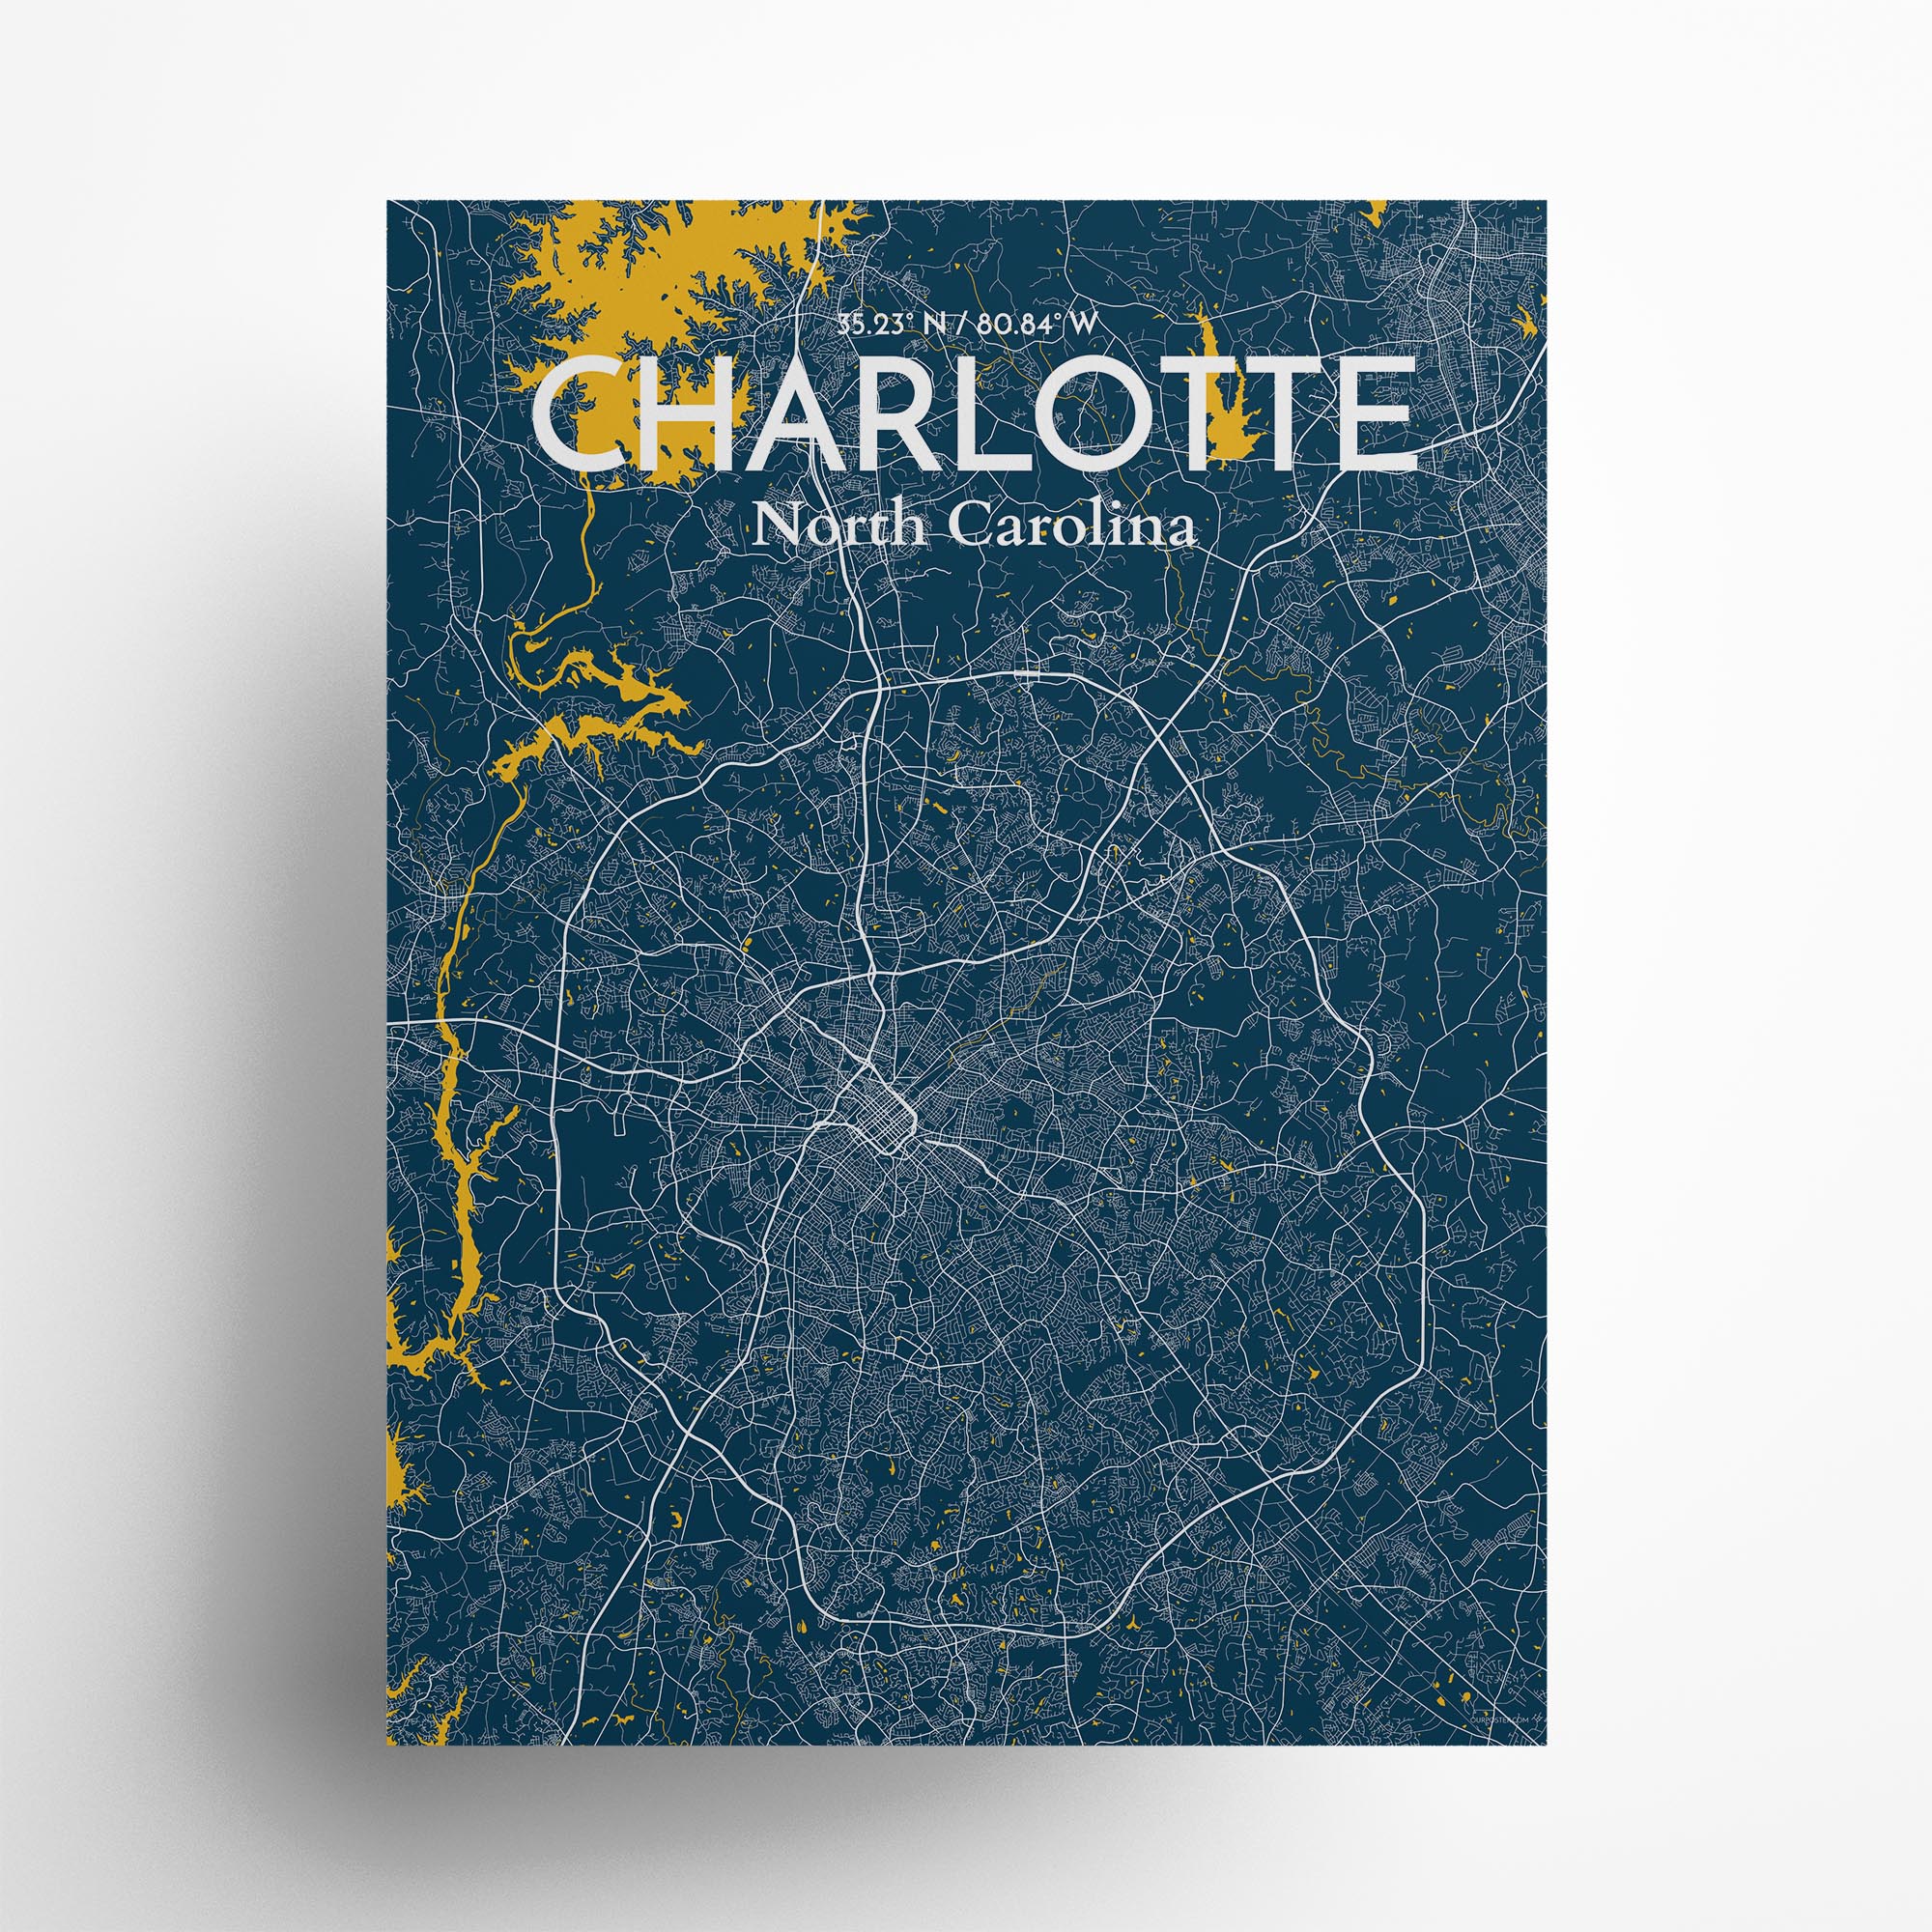 Charlotte city map poster in Amuse of size 18" x 24"